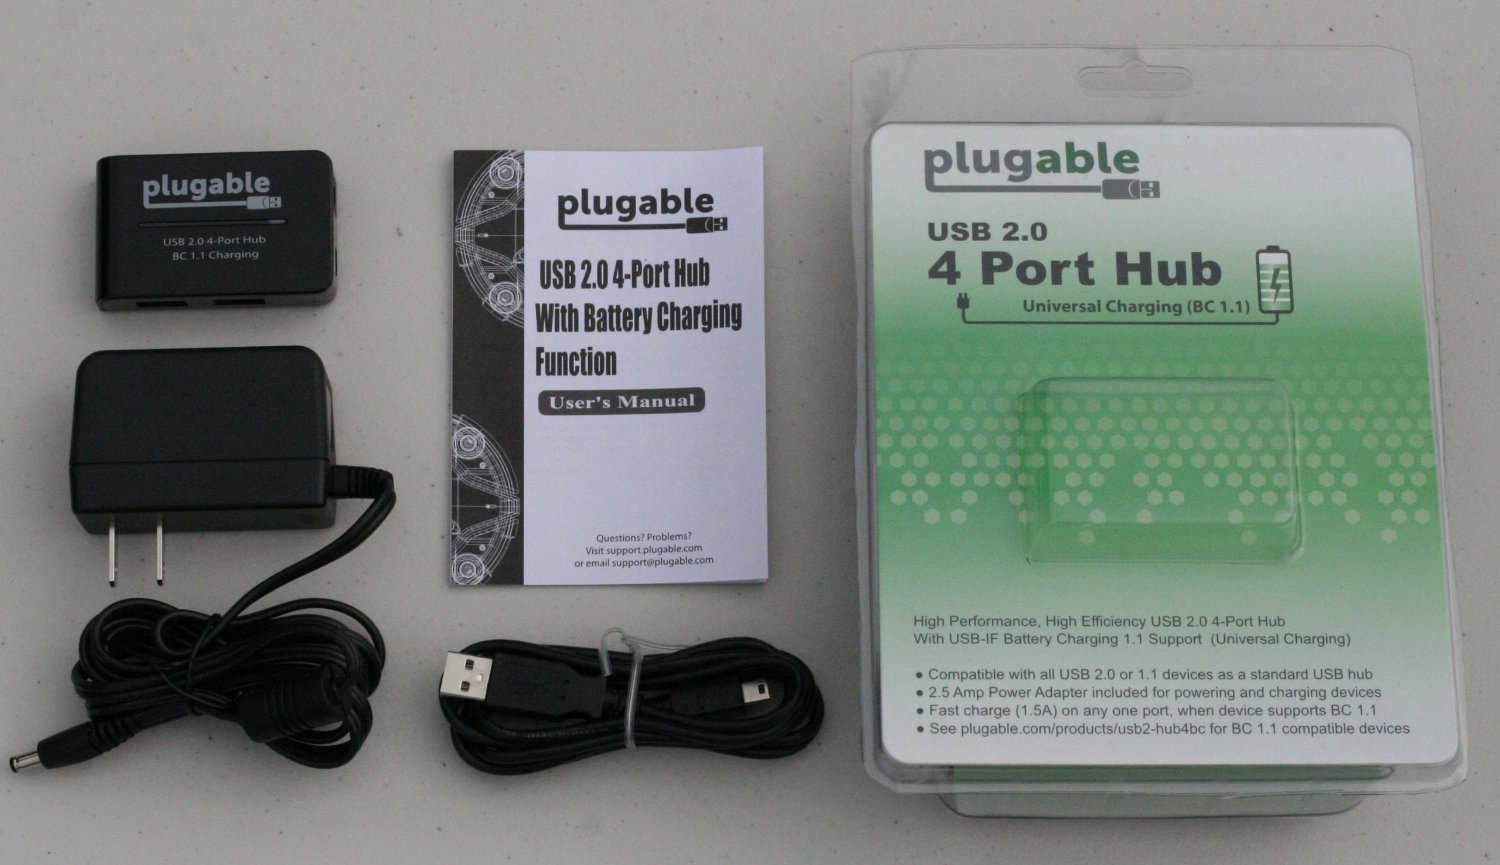 Plugable USB 2.0 4 Port Hub and BC 1.1 Standard compliant Fast Charger with 12.5W Power Adapter, charges Samsung Galaxy S4, iPhone 5, iPad 4, iPad Mini, Nexus 7